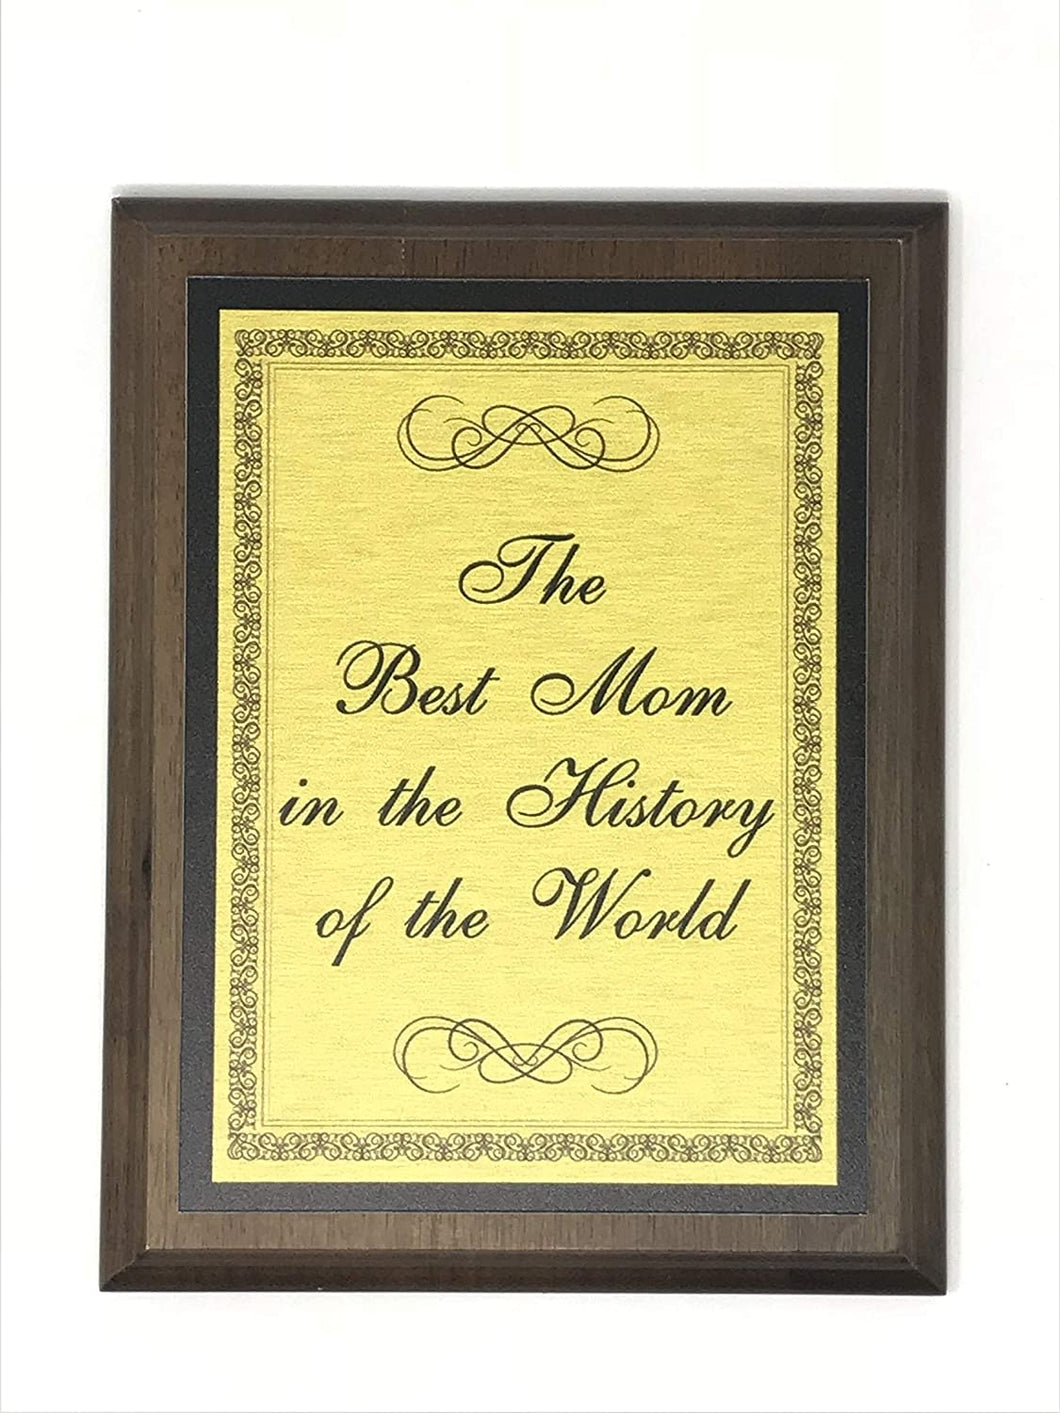 World's Greatest Plaques (The Best Mom in The History of The World's, Gold)